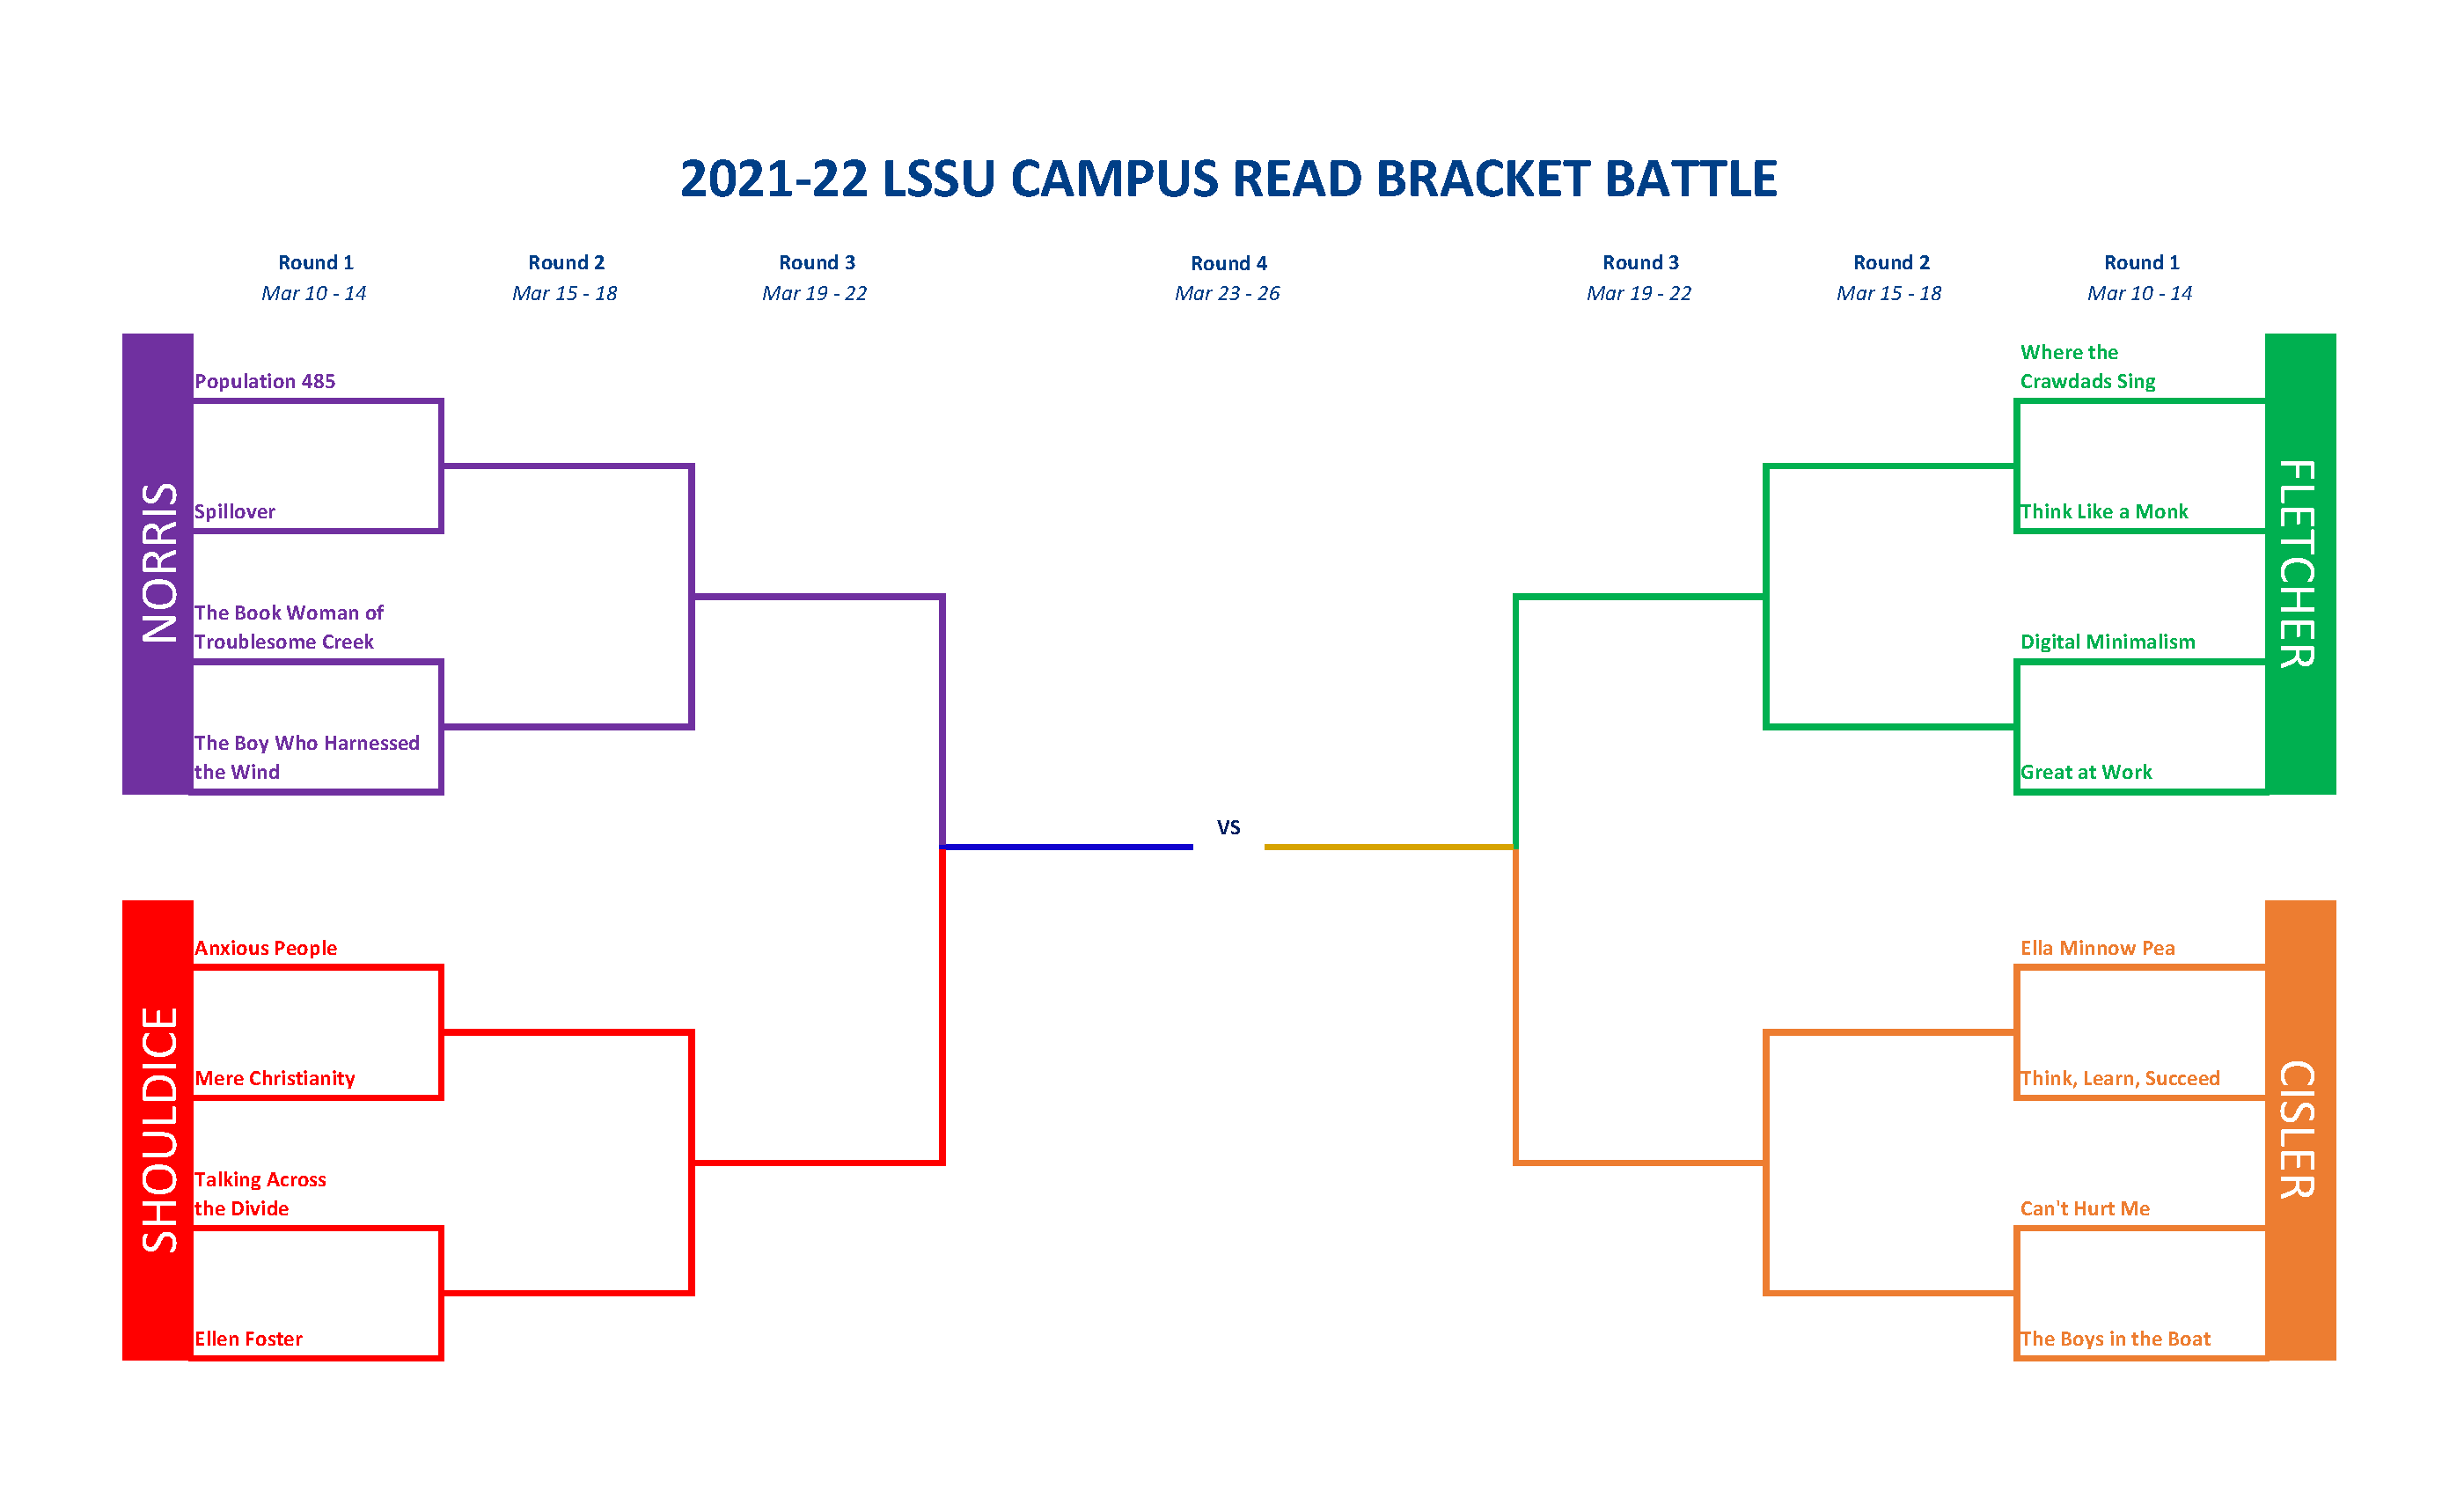 image of bracket used for Campus Read voting